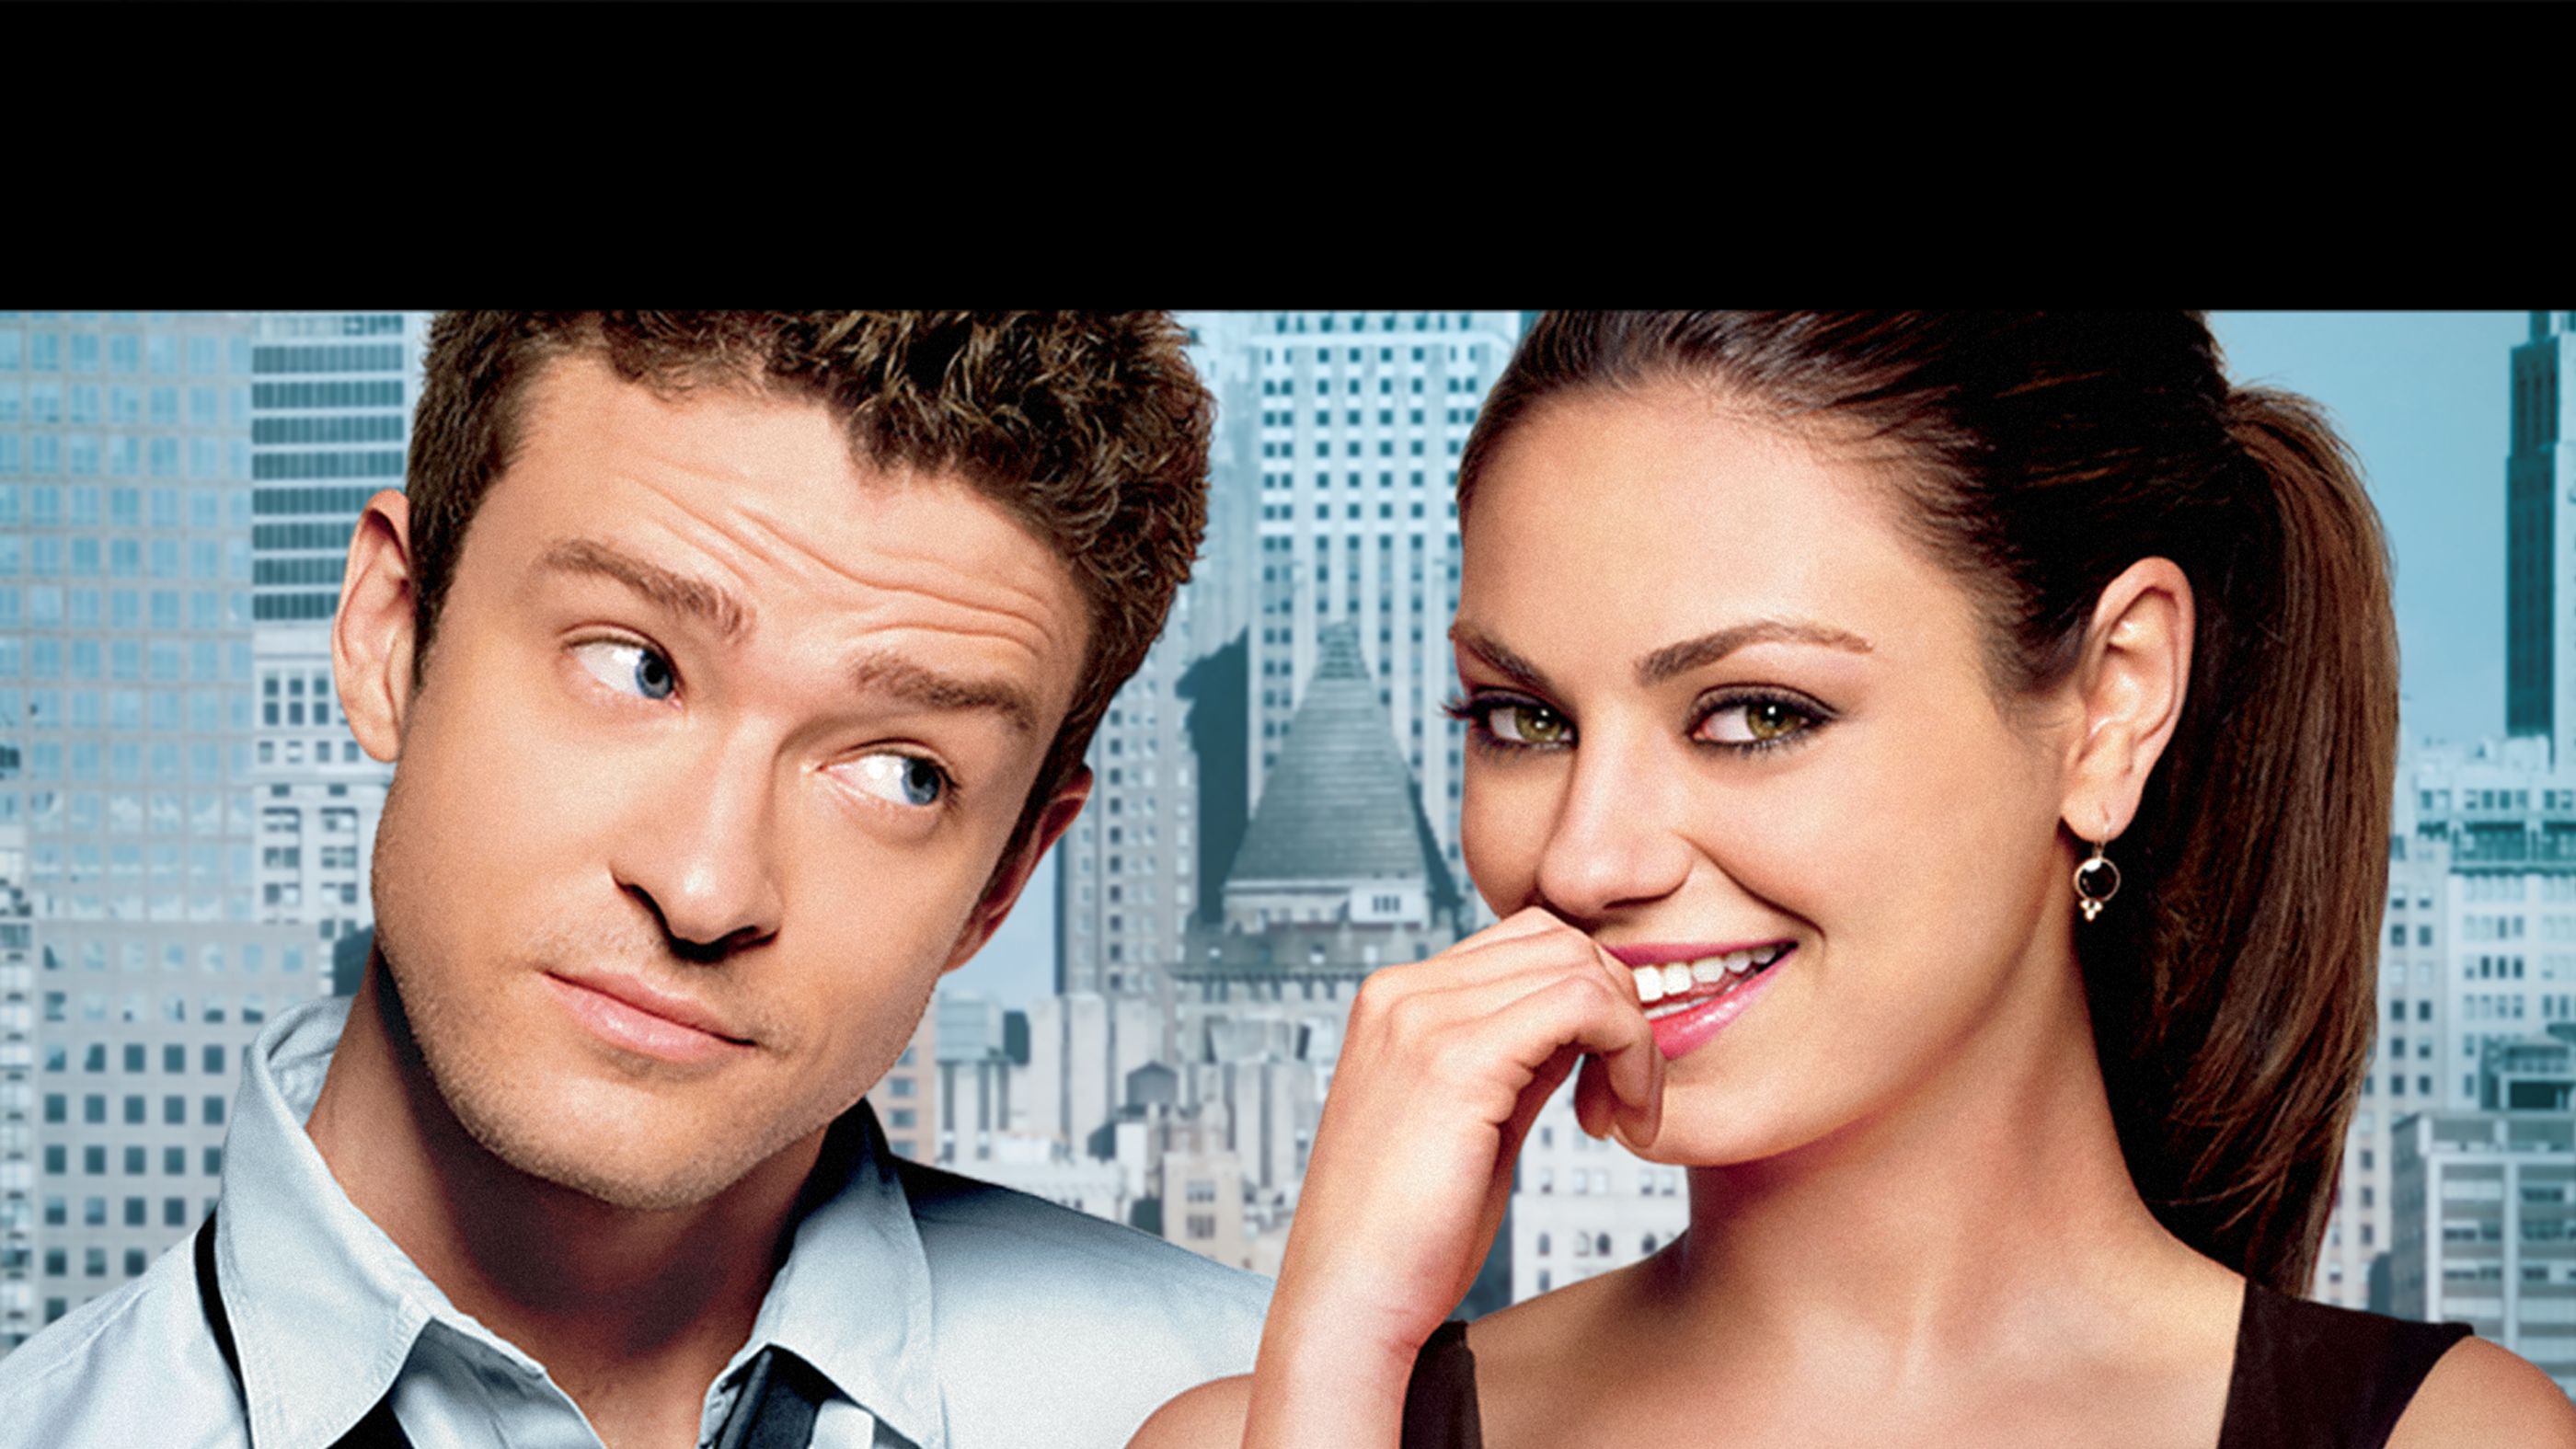 FRIENDS WITH BENEFITS - Trailer 